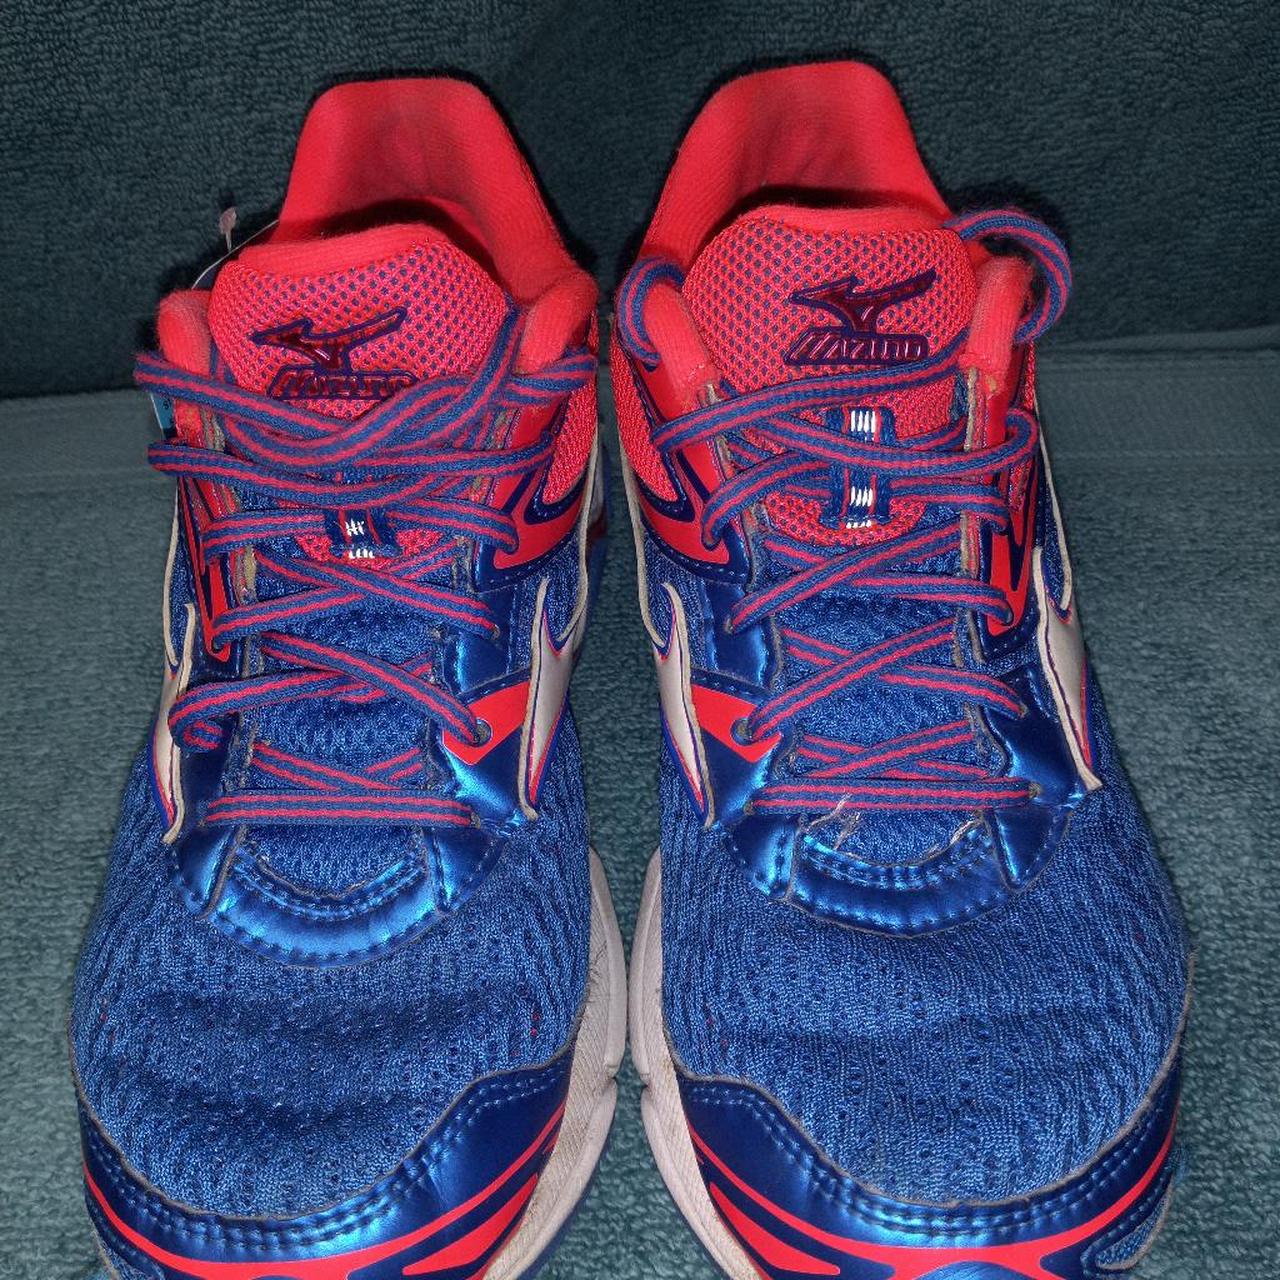 Mizuno Women's Blue and Pink Trainers